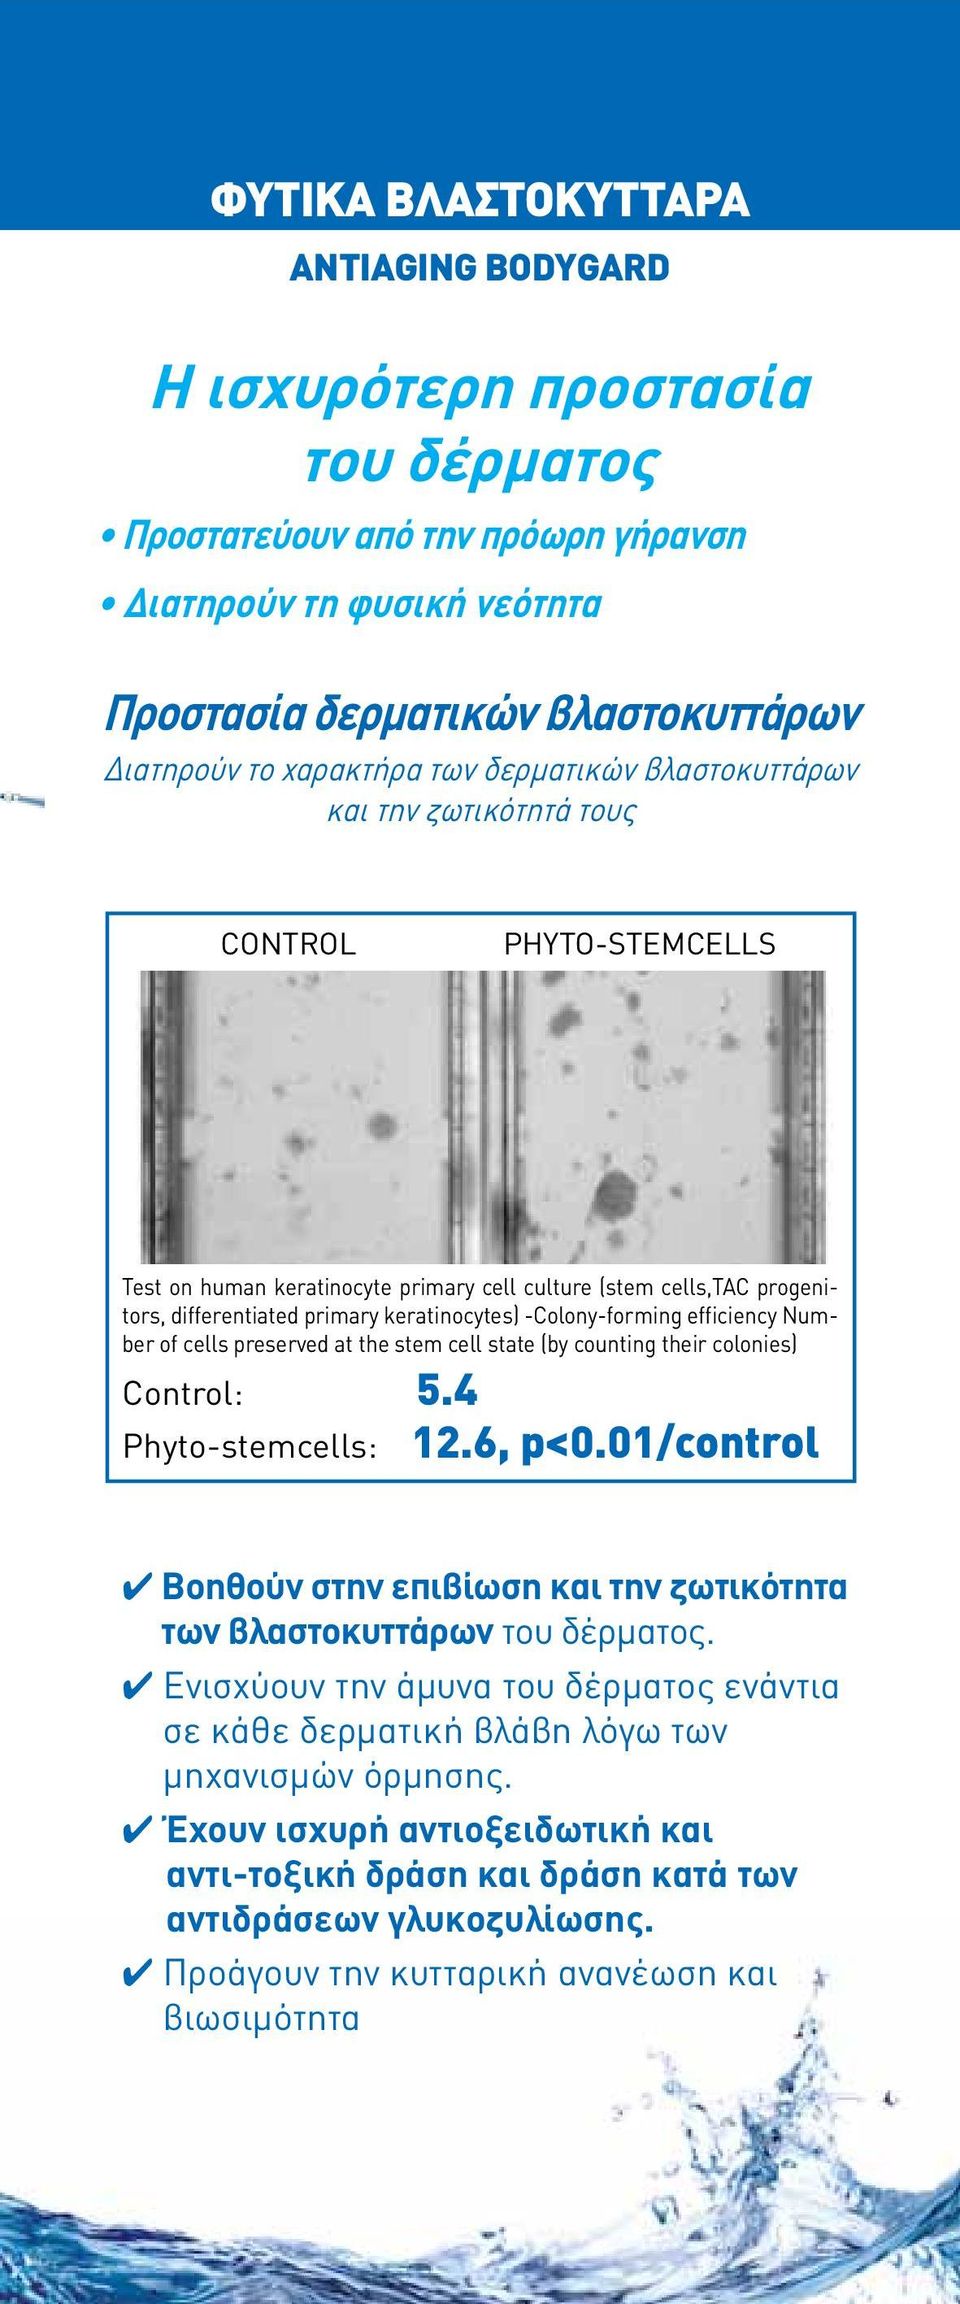 -Colony-forming efficiency Number of cells preserved at the stem cell state (by counting their colonies) Control: 5.4 Phyto-stemcells: 12.6, p<0.